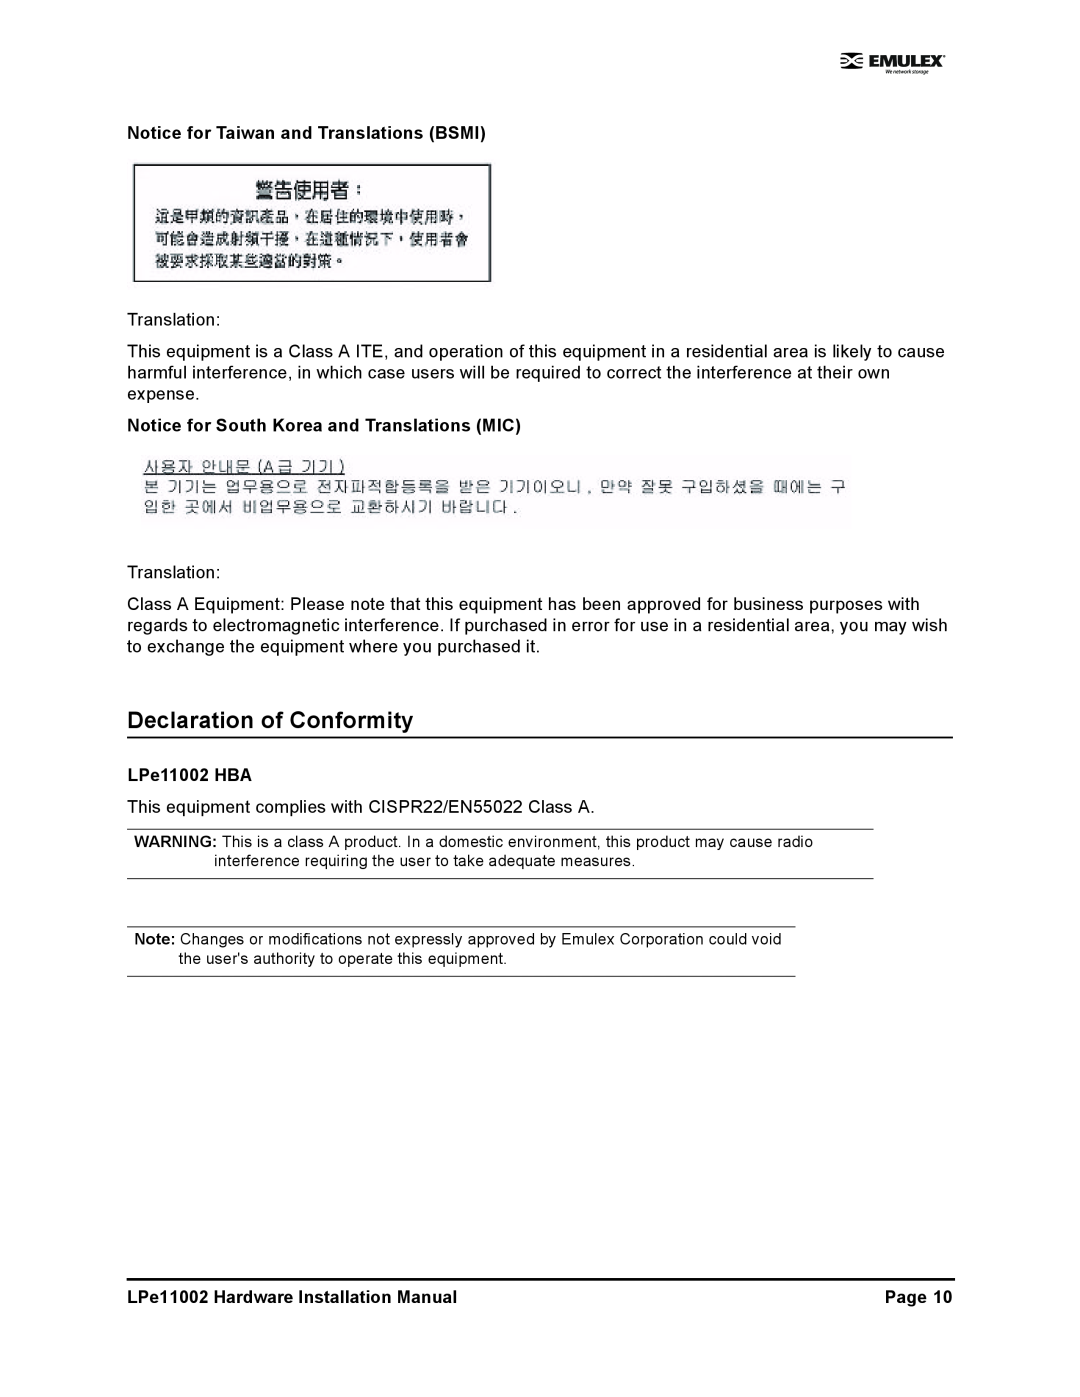 EMC LPE11002EG installation manual Declaration of Conformity, Notice for Taiwan and Translations BSMI, LPe11002 HBA, Page 